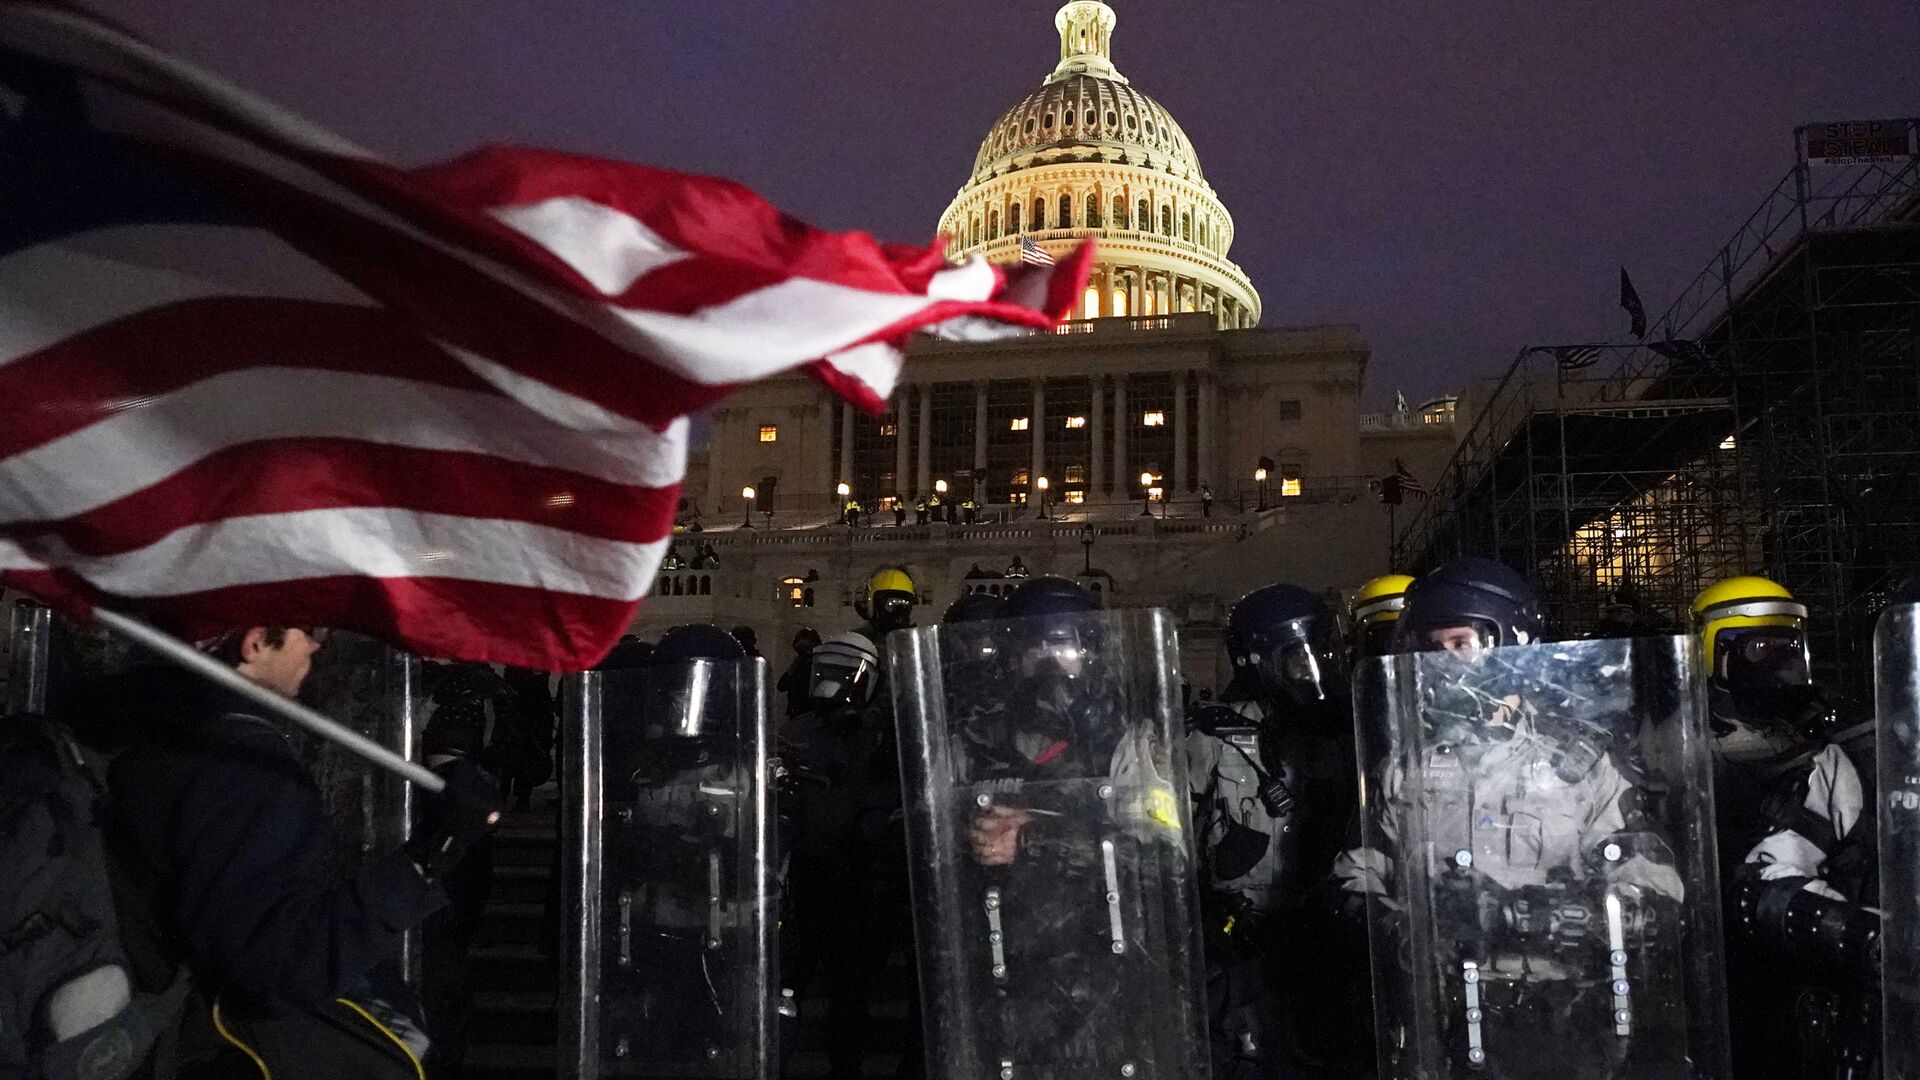 Police stand guard after a day of riots at the U.S. Capitol in Washington on Wednesday, Jan. 6, 2021 - Sputnik International, 1920, 28.10.2021